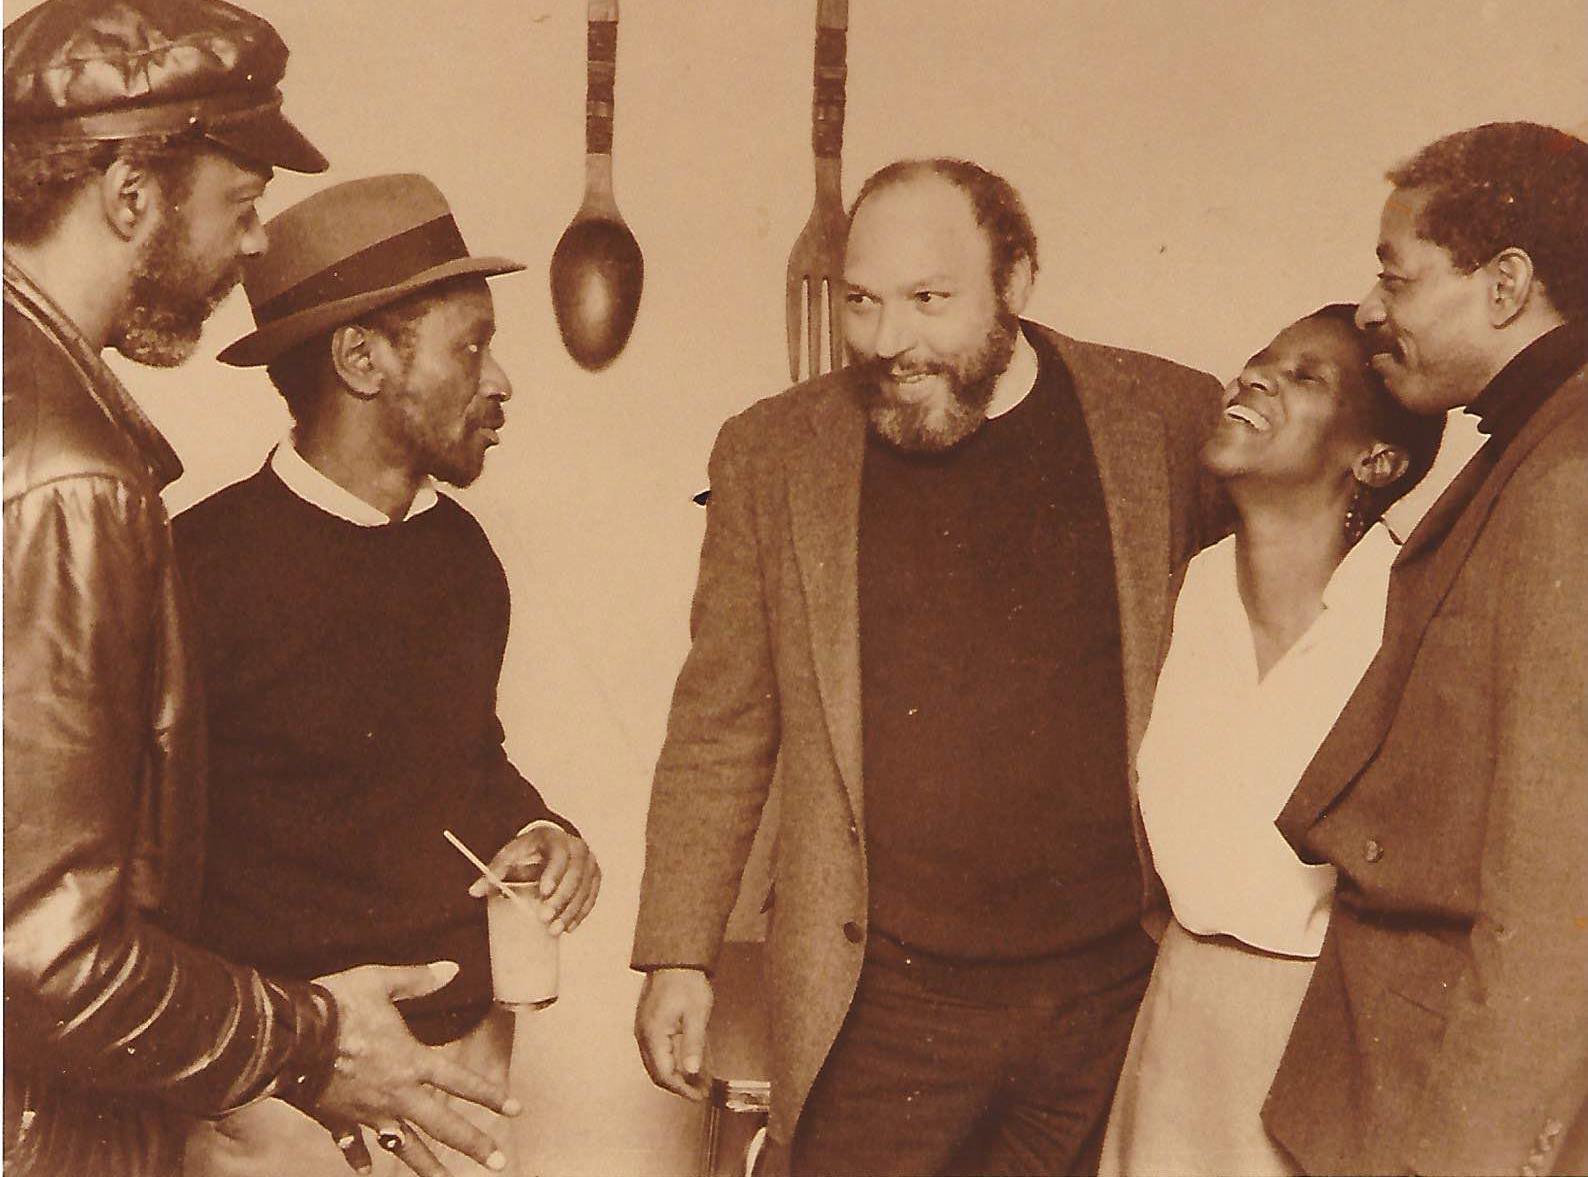 August Wilson with Pittsburgh's Wiley Avenue Poets in the mid-1980s. [According to Southers their name was the Poets of the Centre Avenue Tradition]